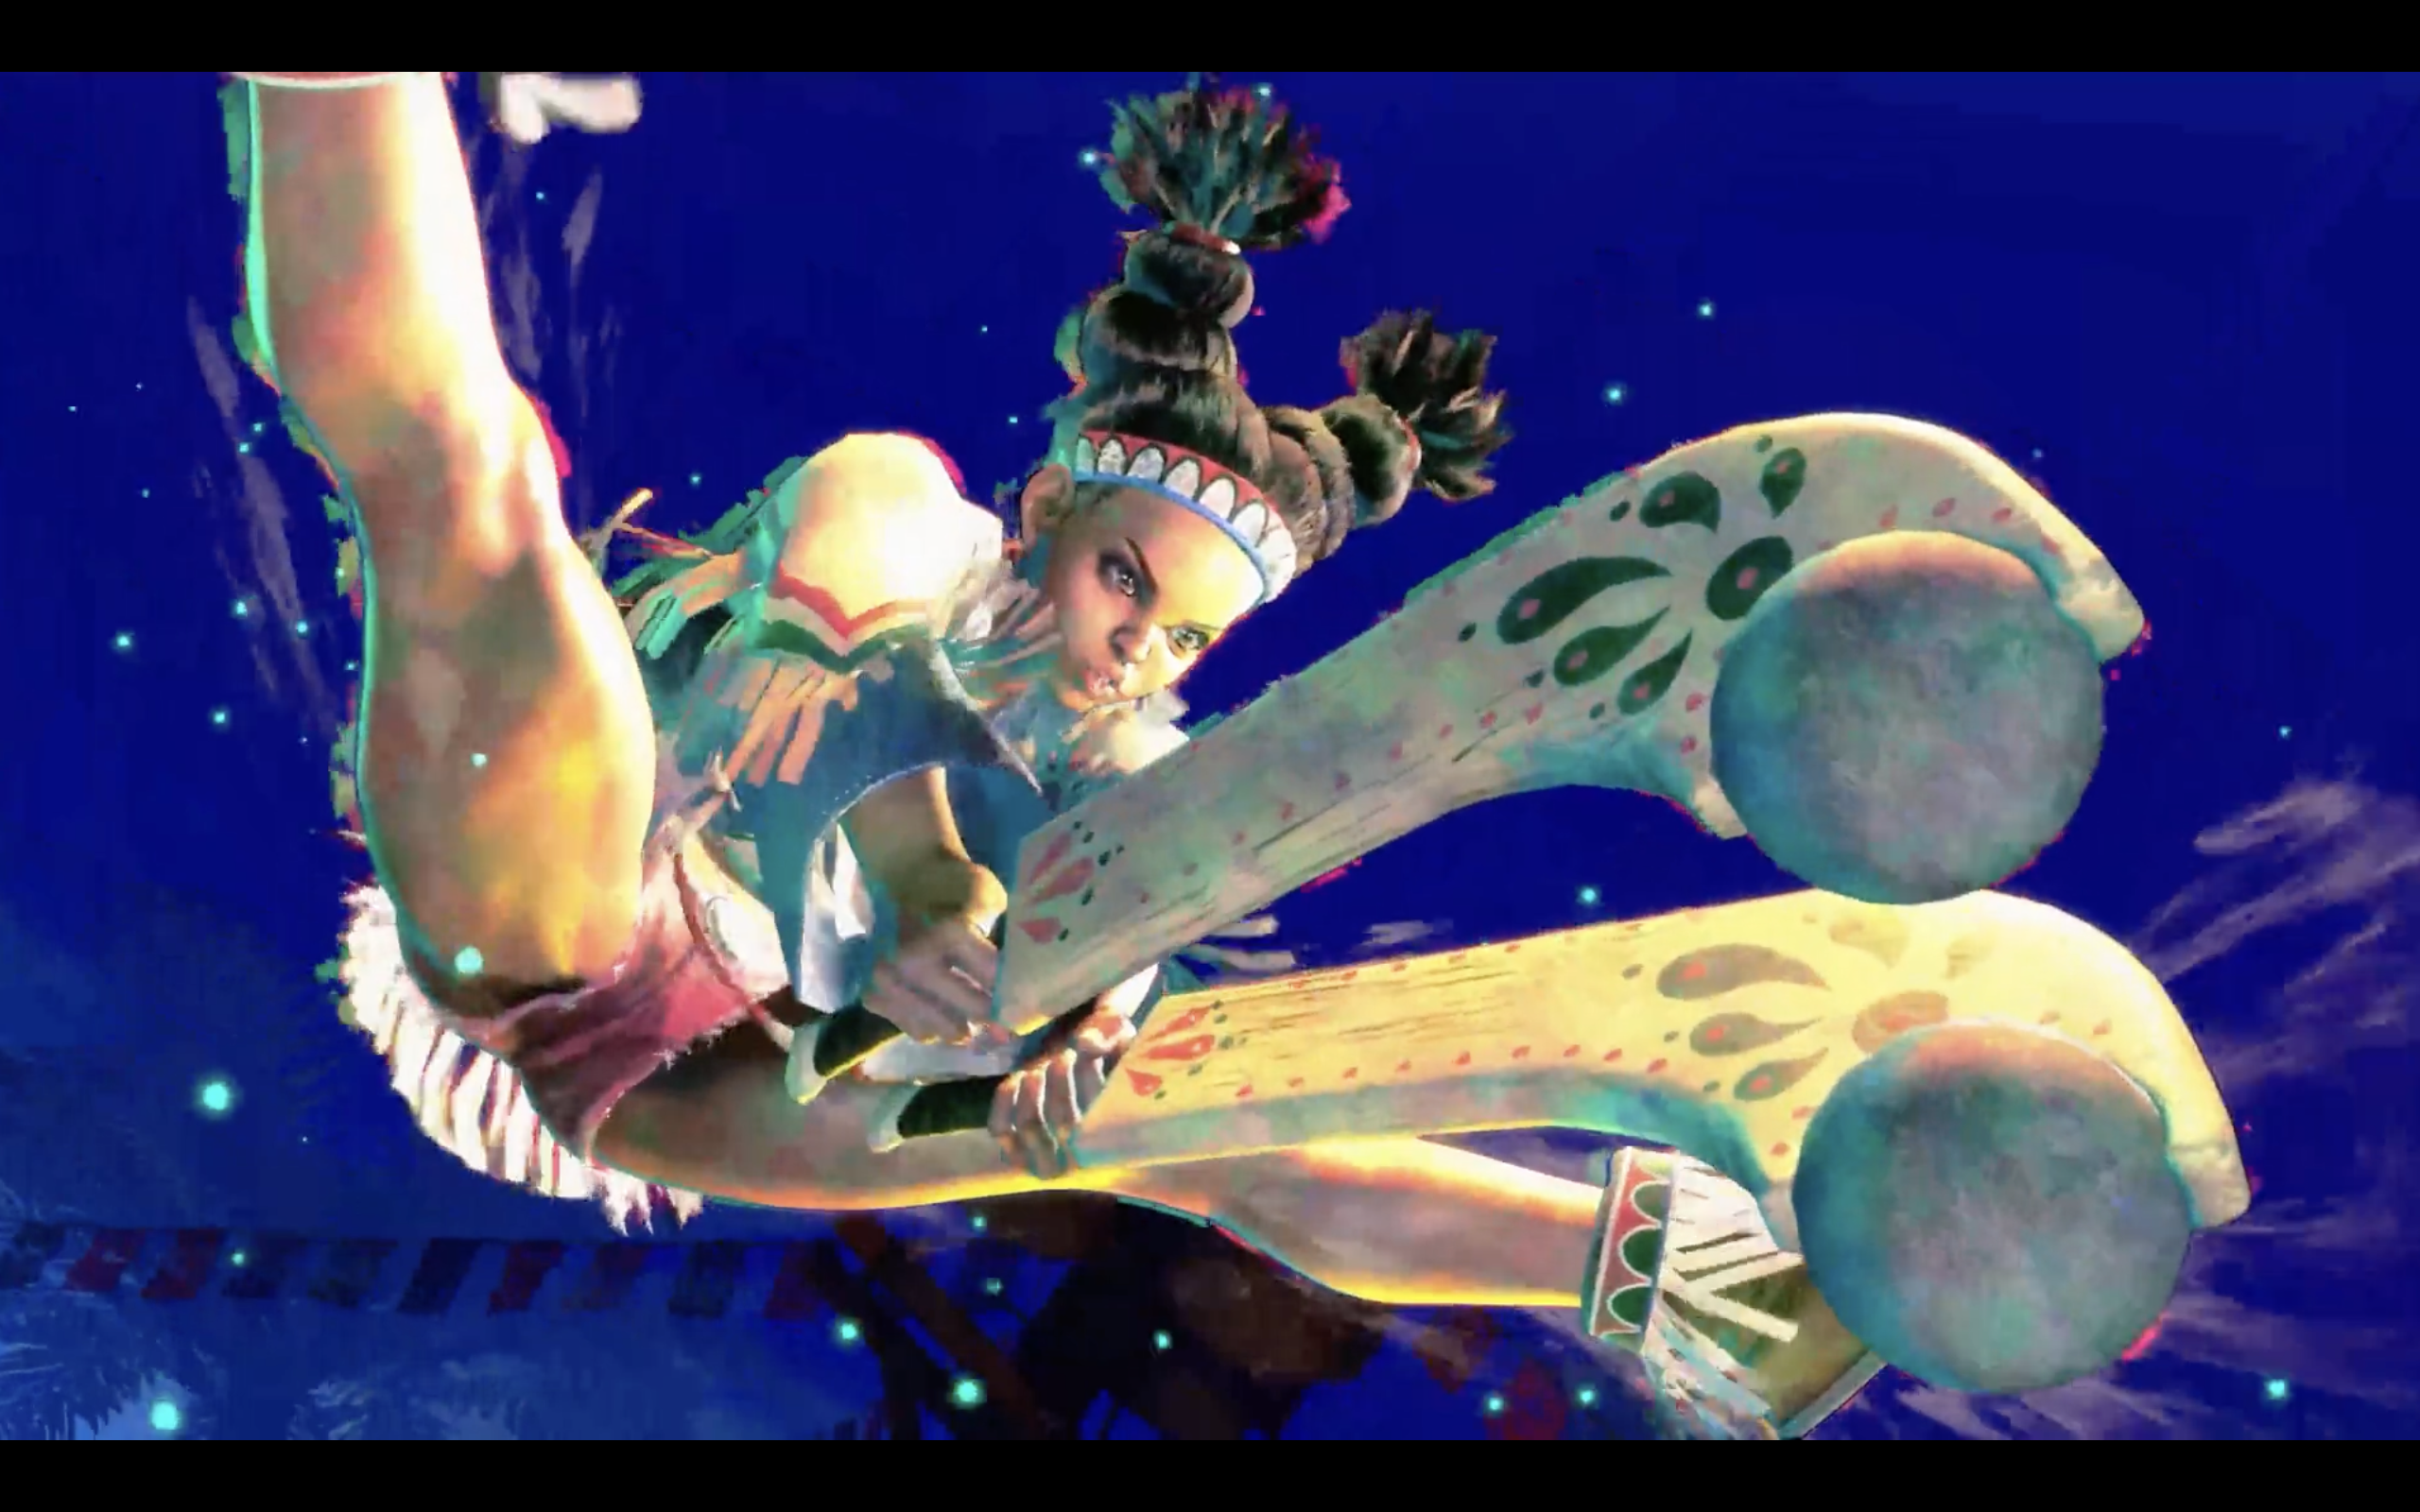 Cammy and her arse coming to Street Fighter IV iPhone – Destructoid